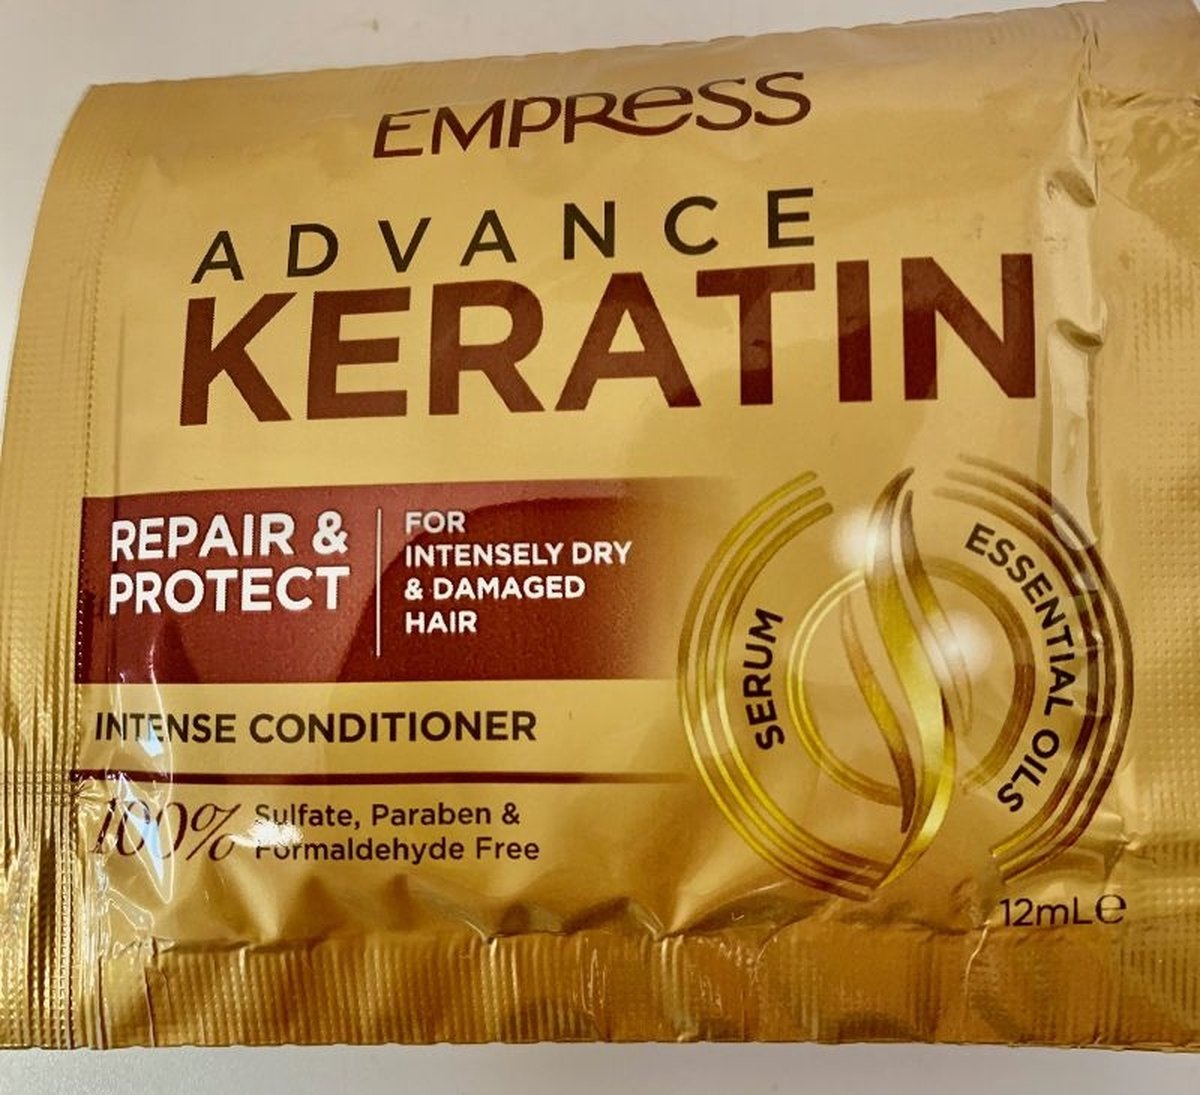 Empress Advance Keratin Repair and Protect Conditioner, 6 x 12ml